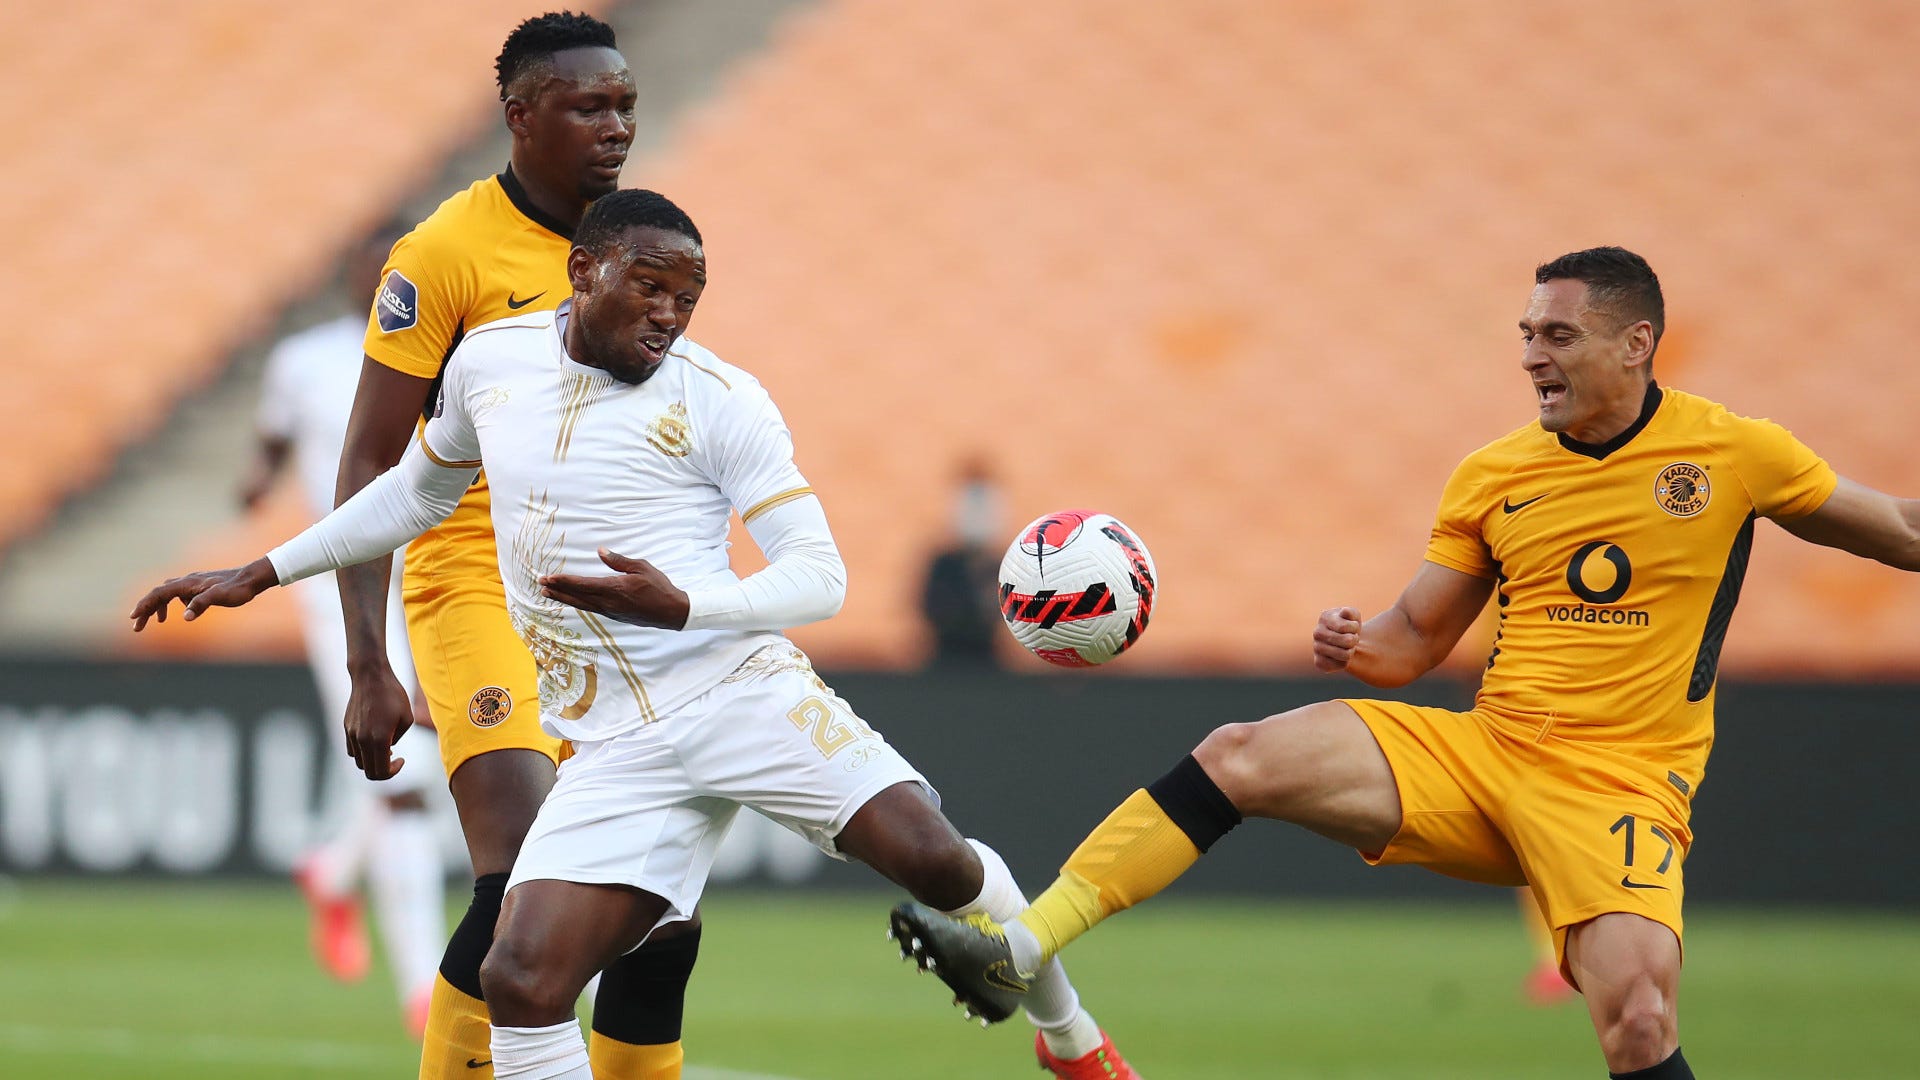 Victor Letsoalo of Royal AM challenged by Cole Alexander of Kaizer Chiefs